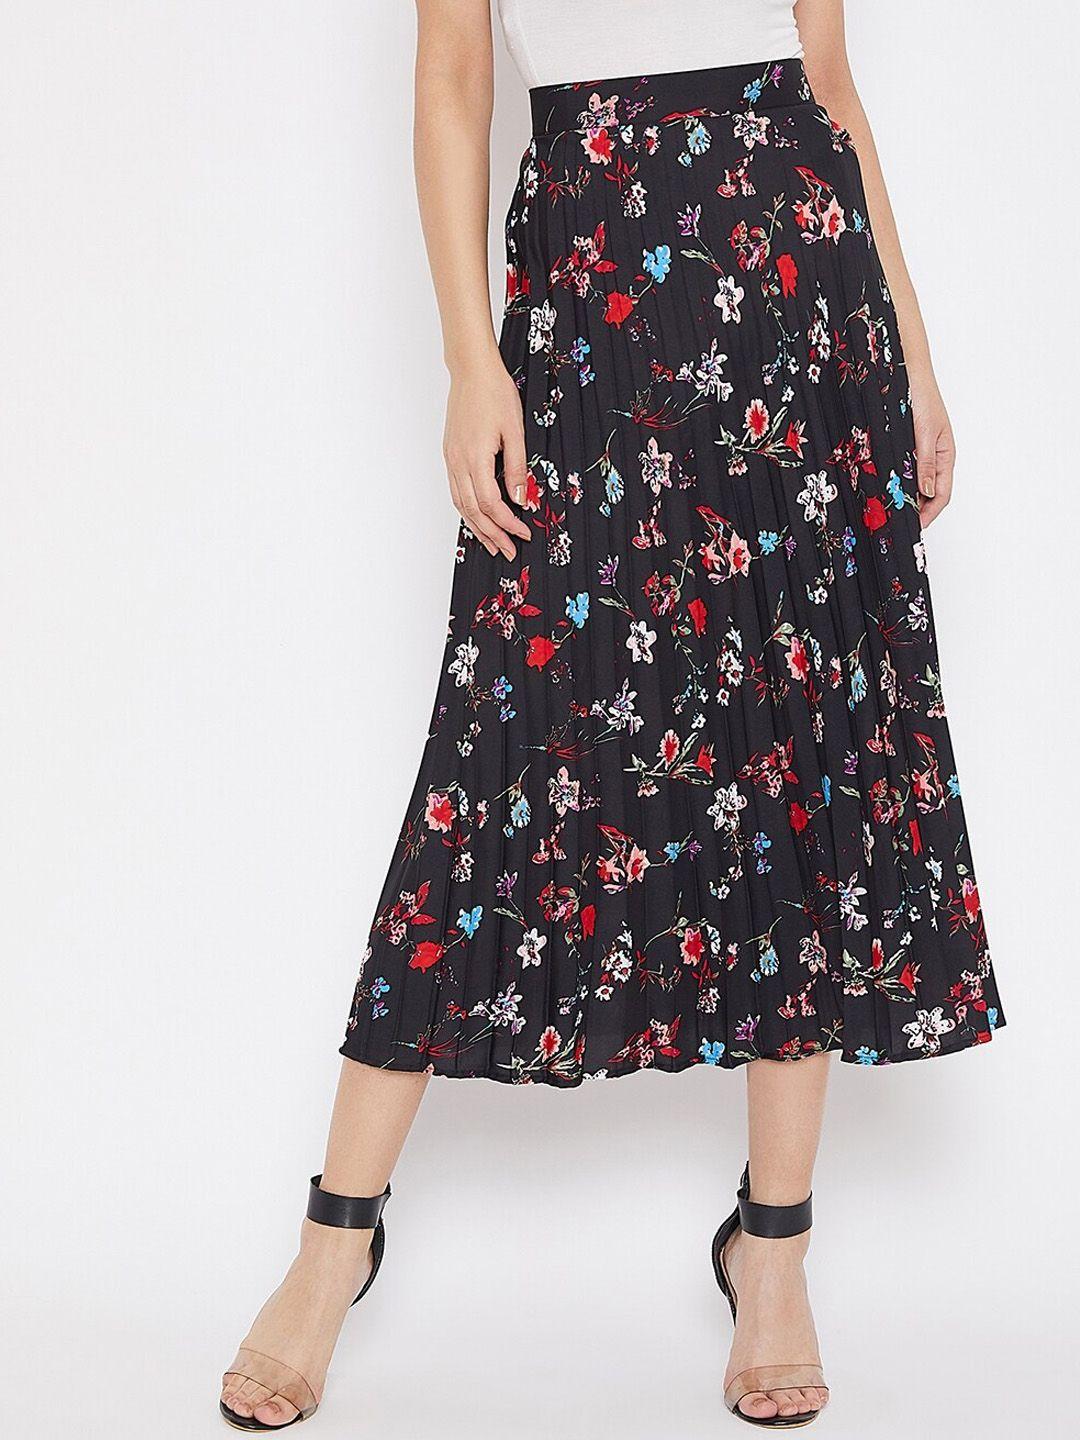 uptownie-lite-women-black-&-red-floral-printed-accordion-pleated-flared-skirt